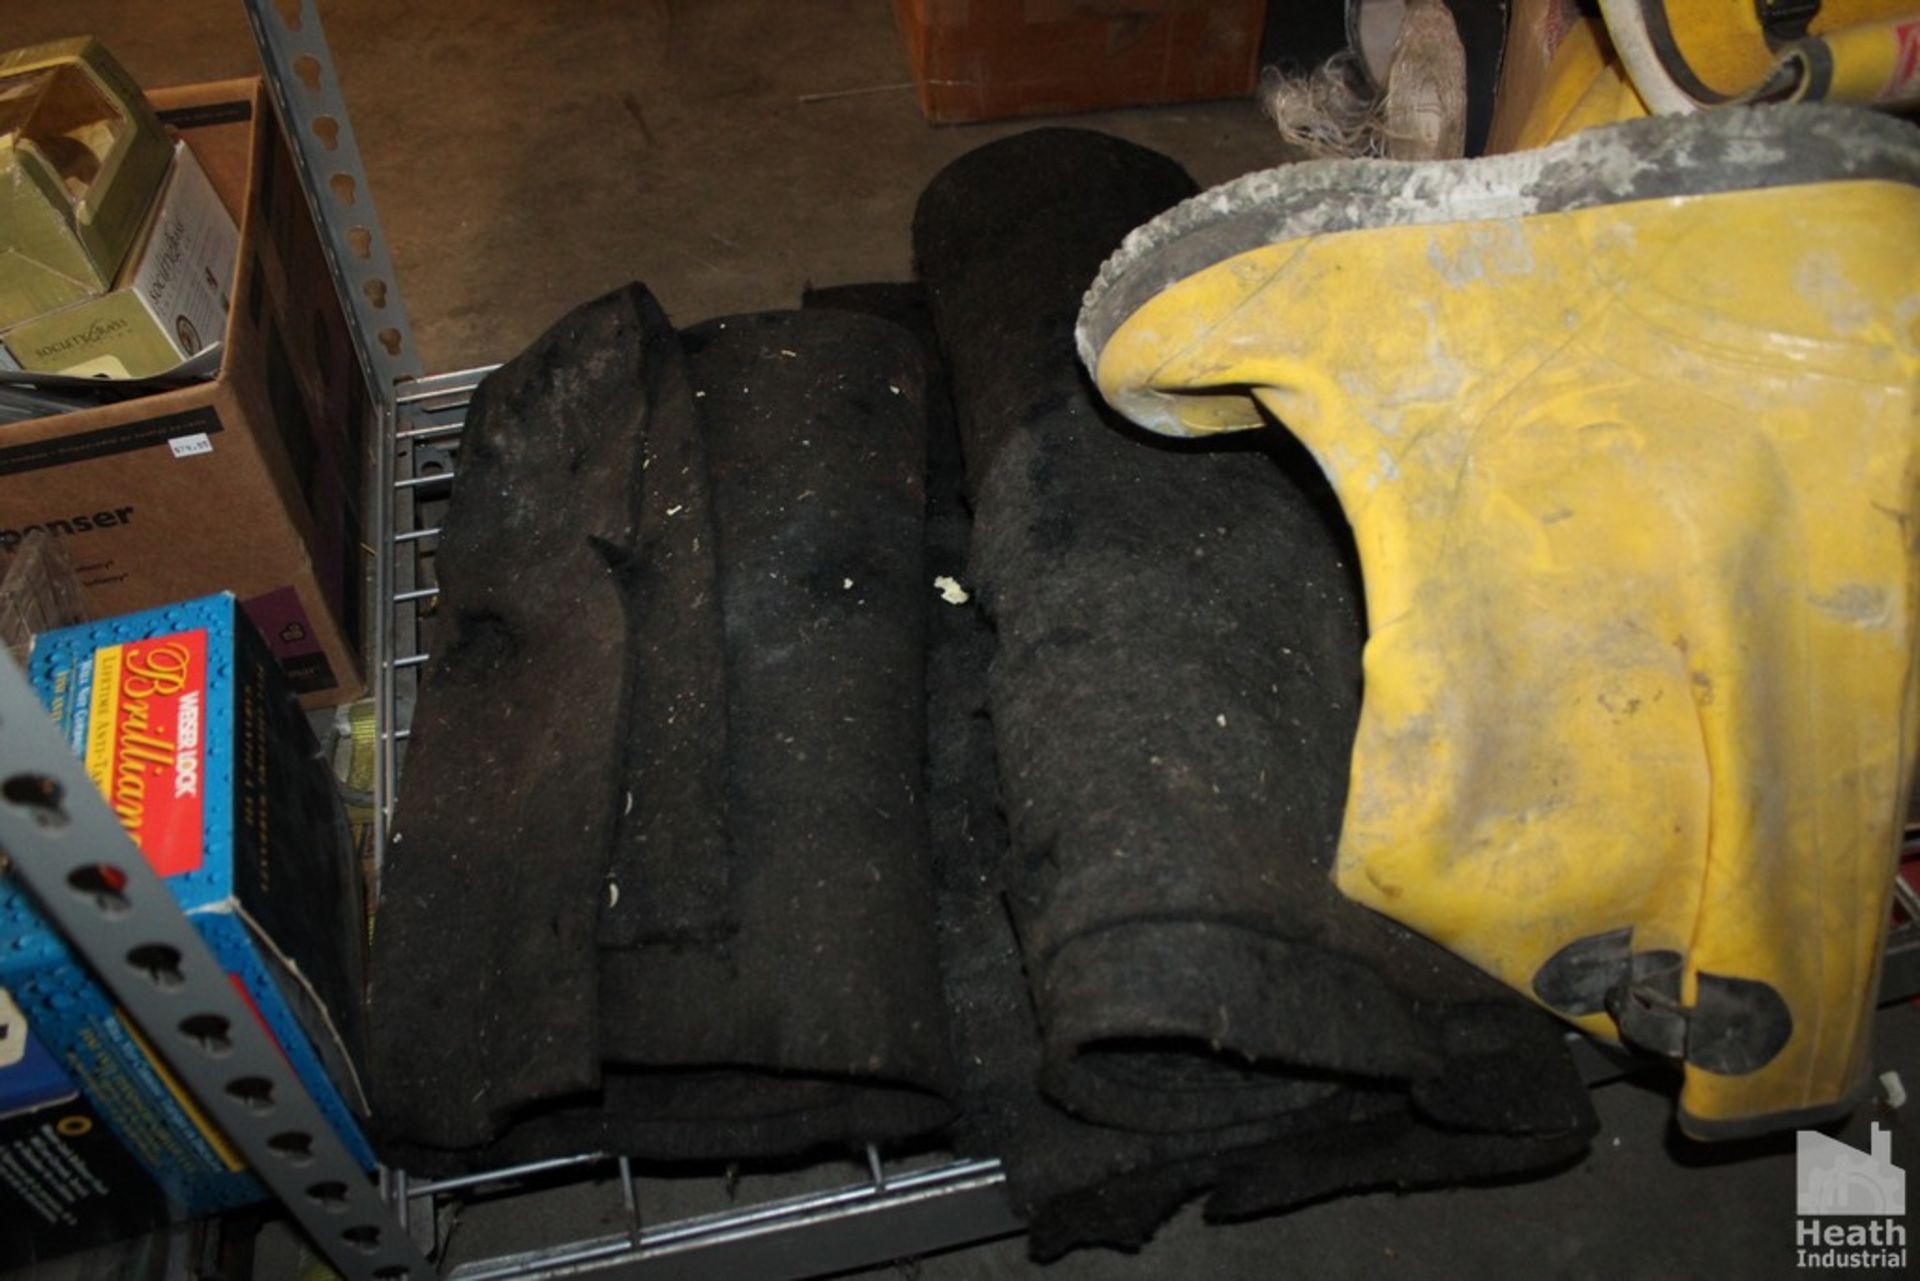 CONTENTS OF SHELVES INCLUDING TIRE WRENCH, PUMP AND RUBBER BOOTS - Image 5 of 5